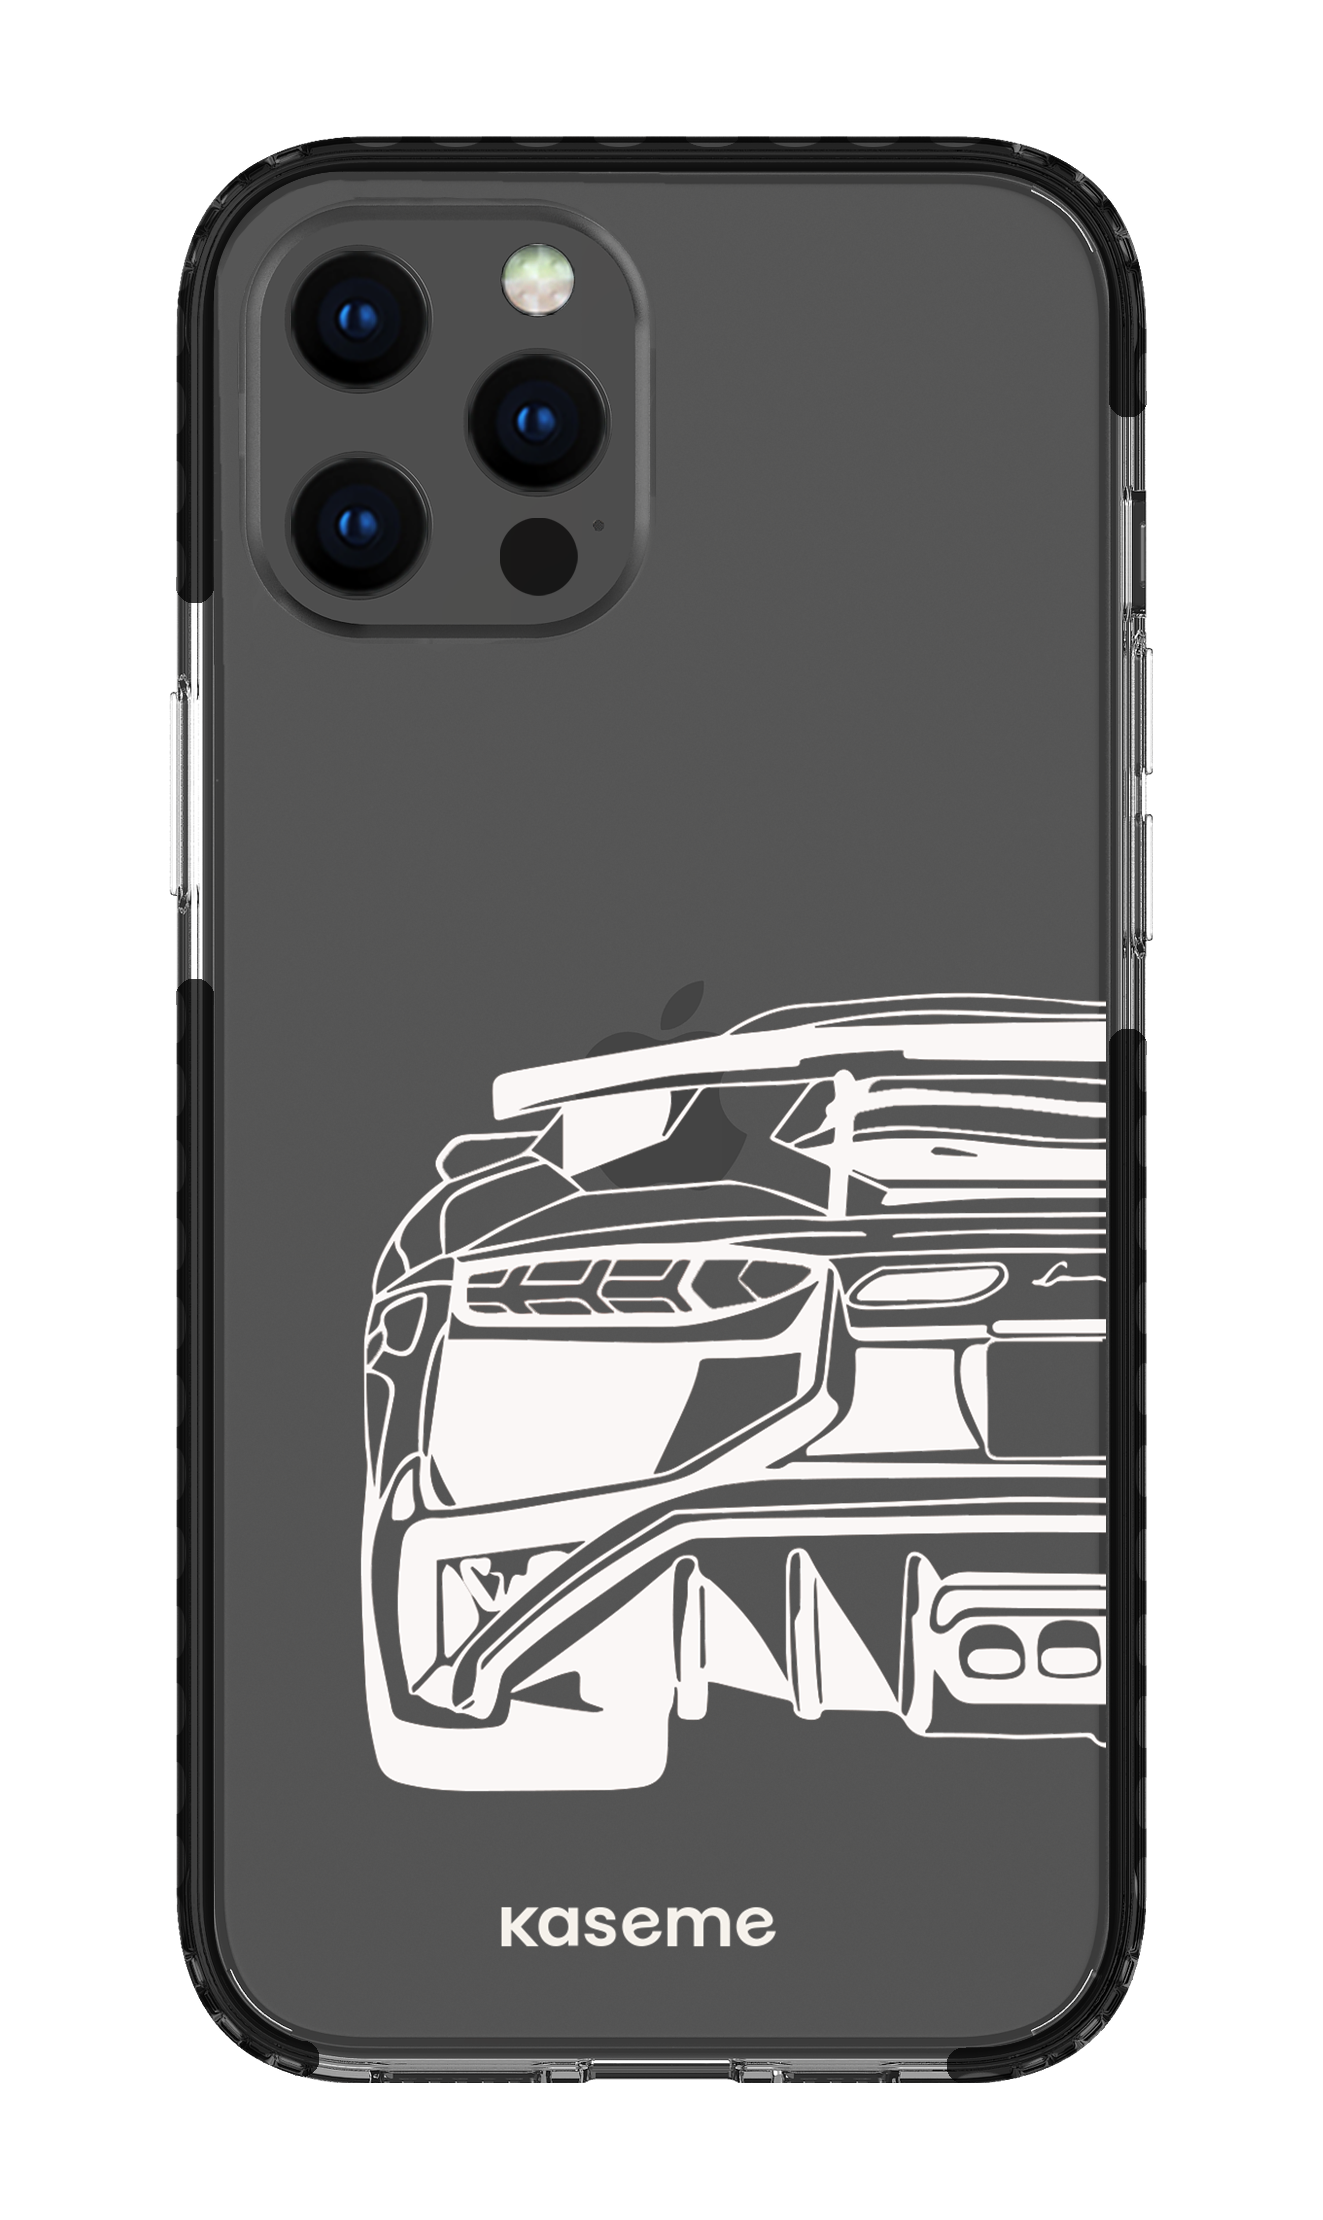 Lambo clear case - iPhone 12 Pro Max